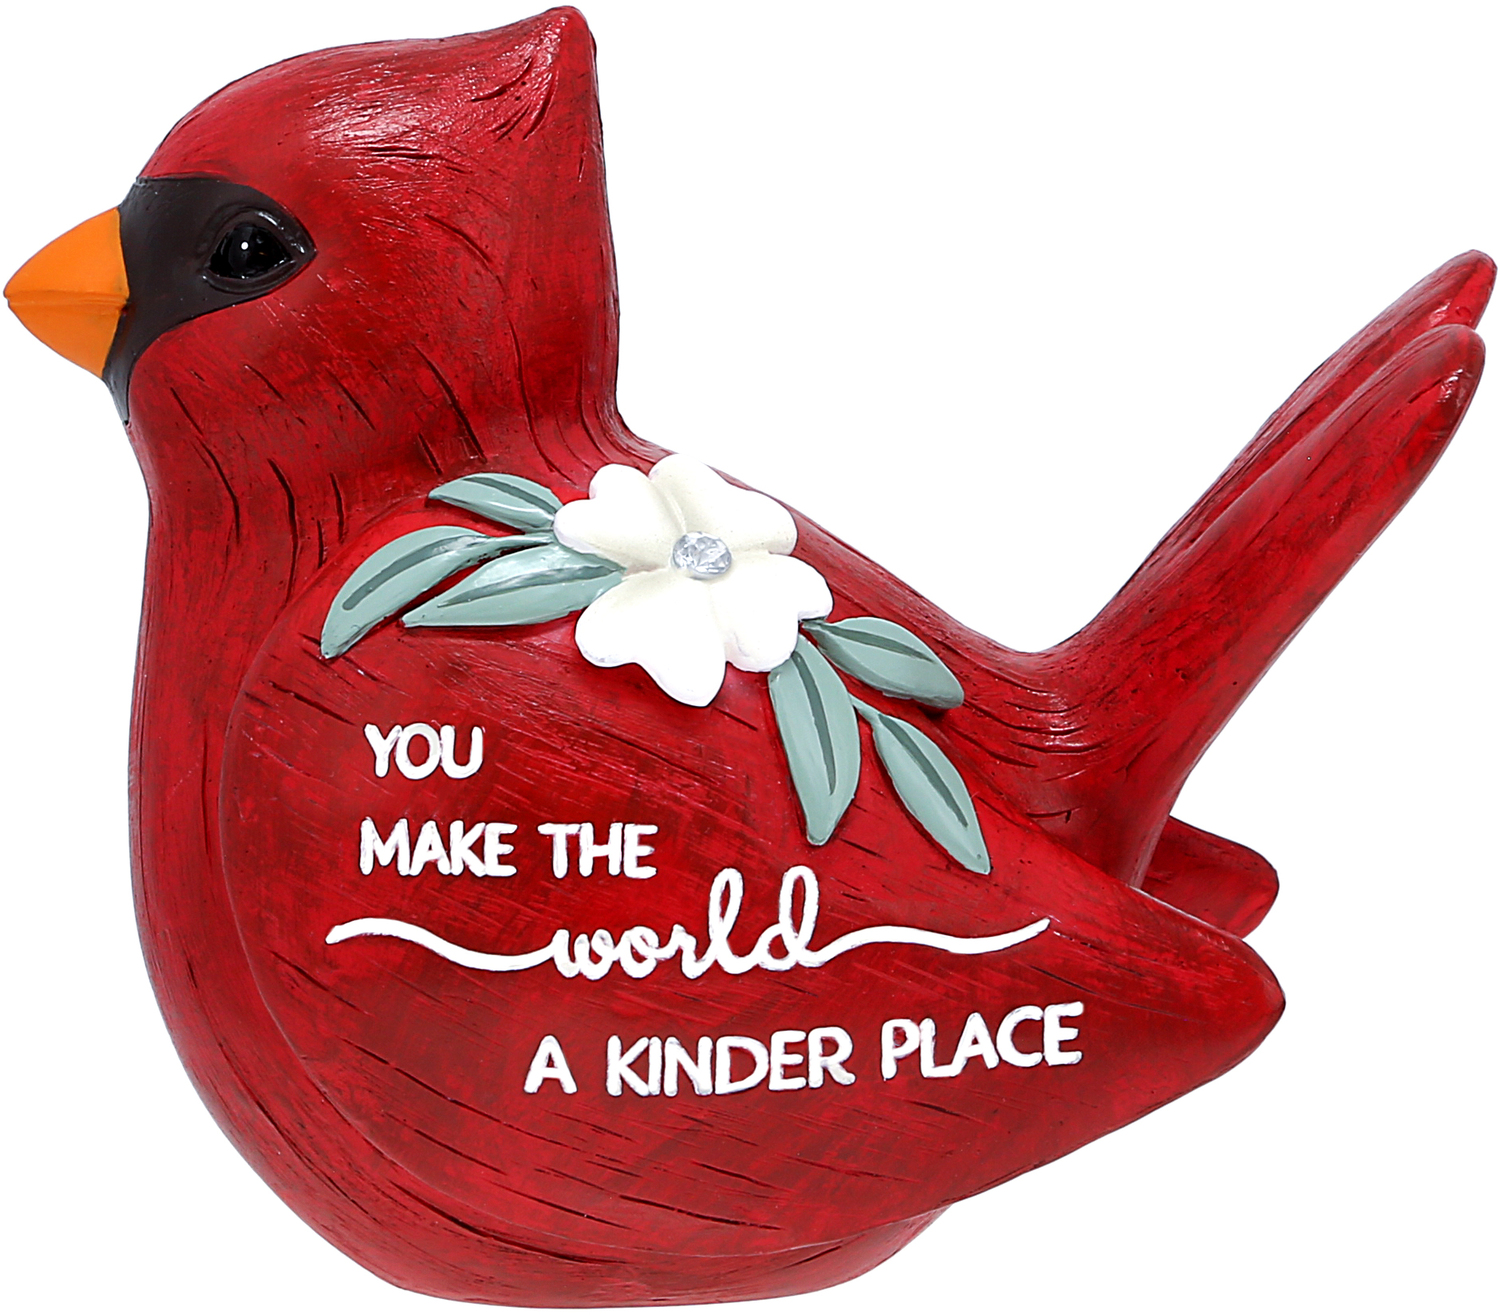 Kinder Place by Always by Your Side - Kinder Place - 3.75" Cardinal